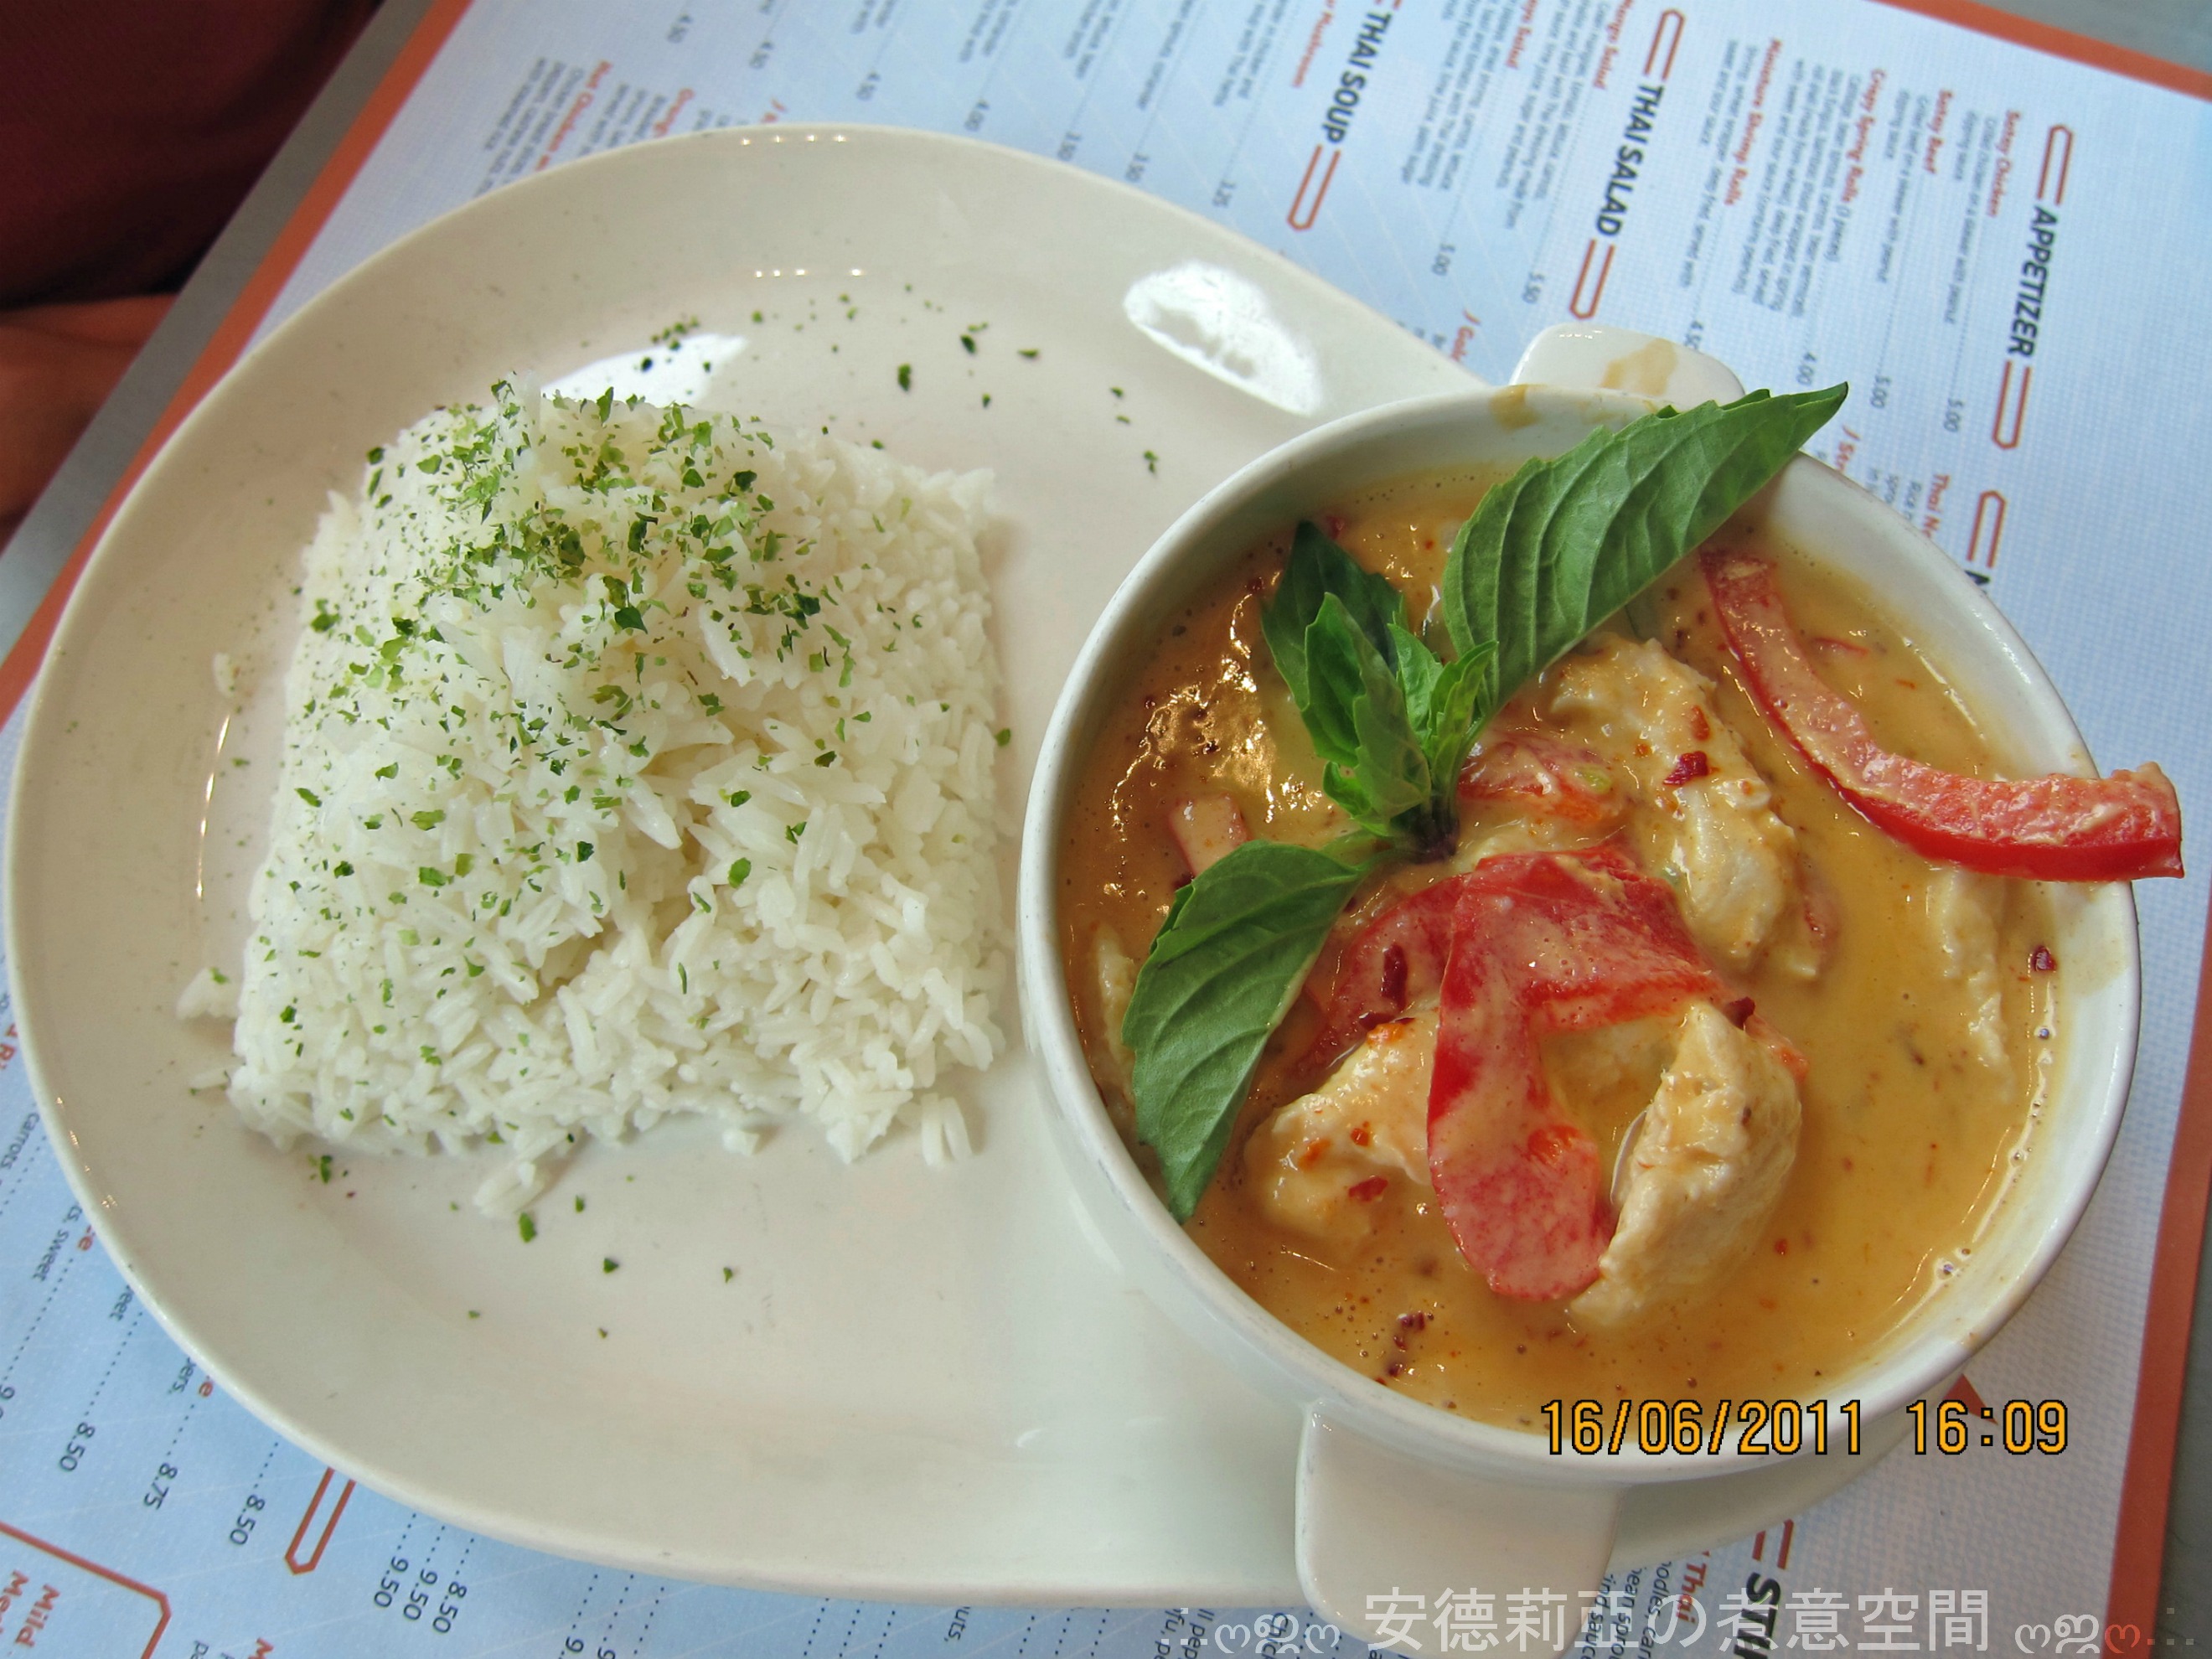 Panang Curry Chicken